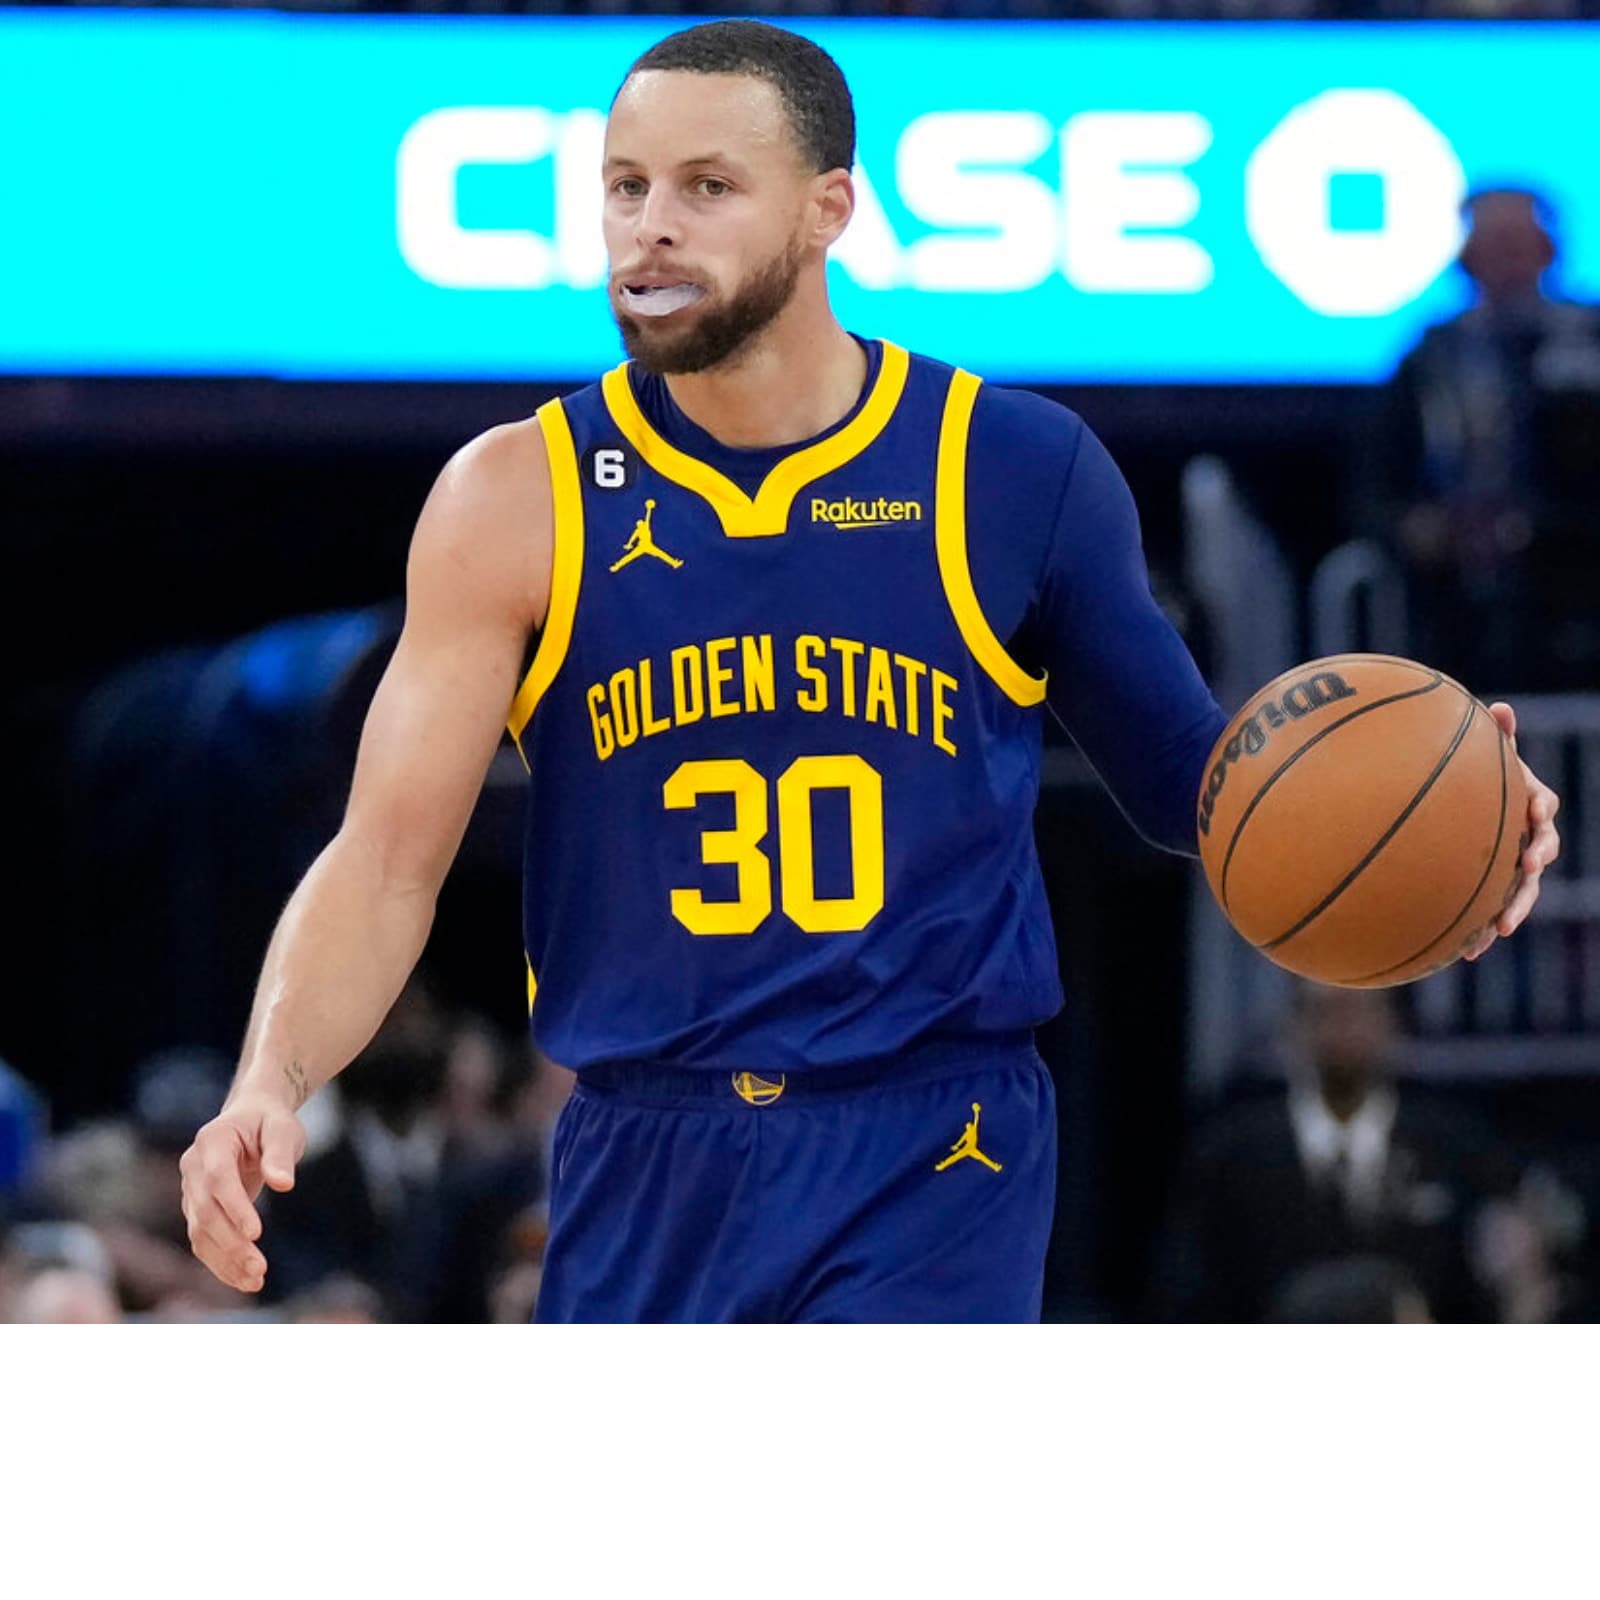 Stephen Curry knee injury: X-rays negative, further examination pending /  News 